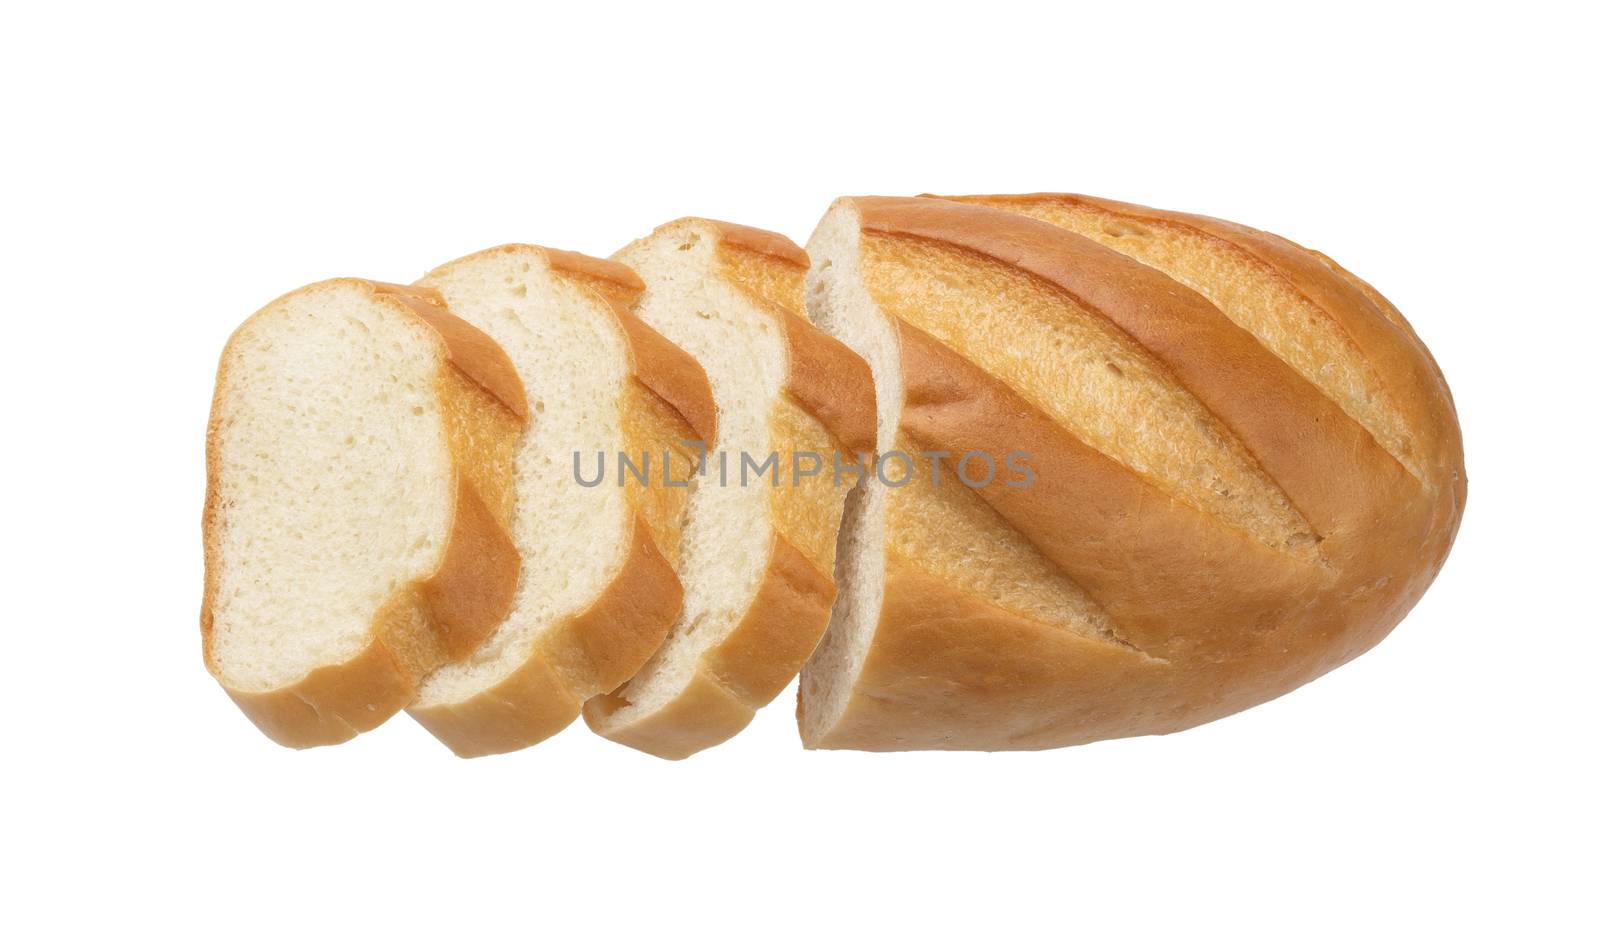 Sliced bread isolated on white background with clipping path